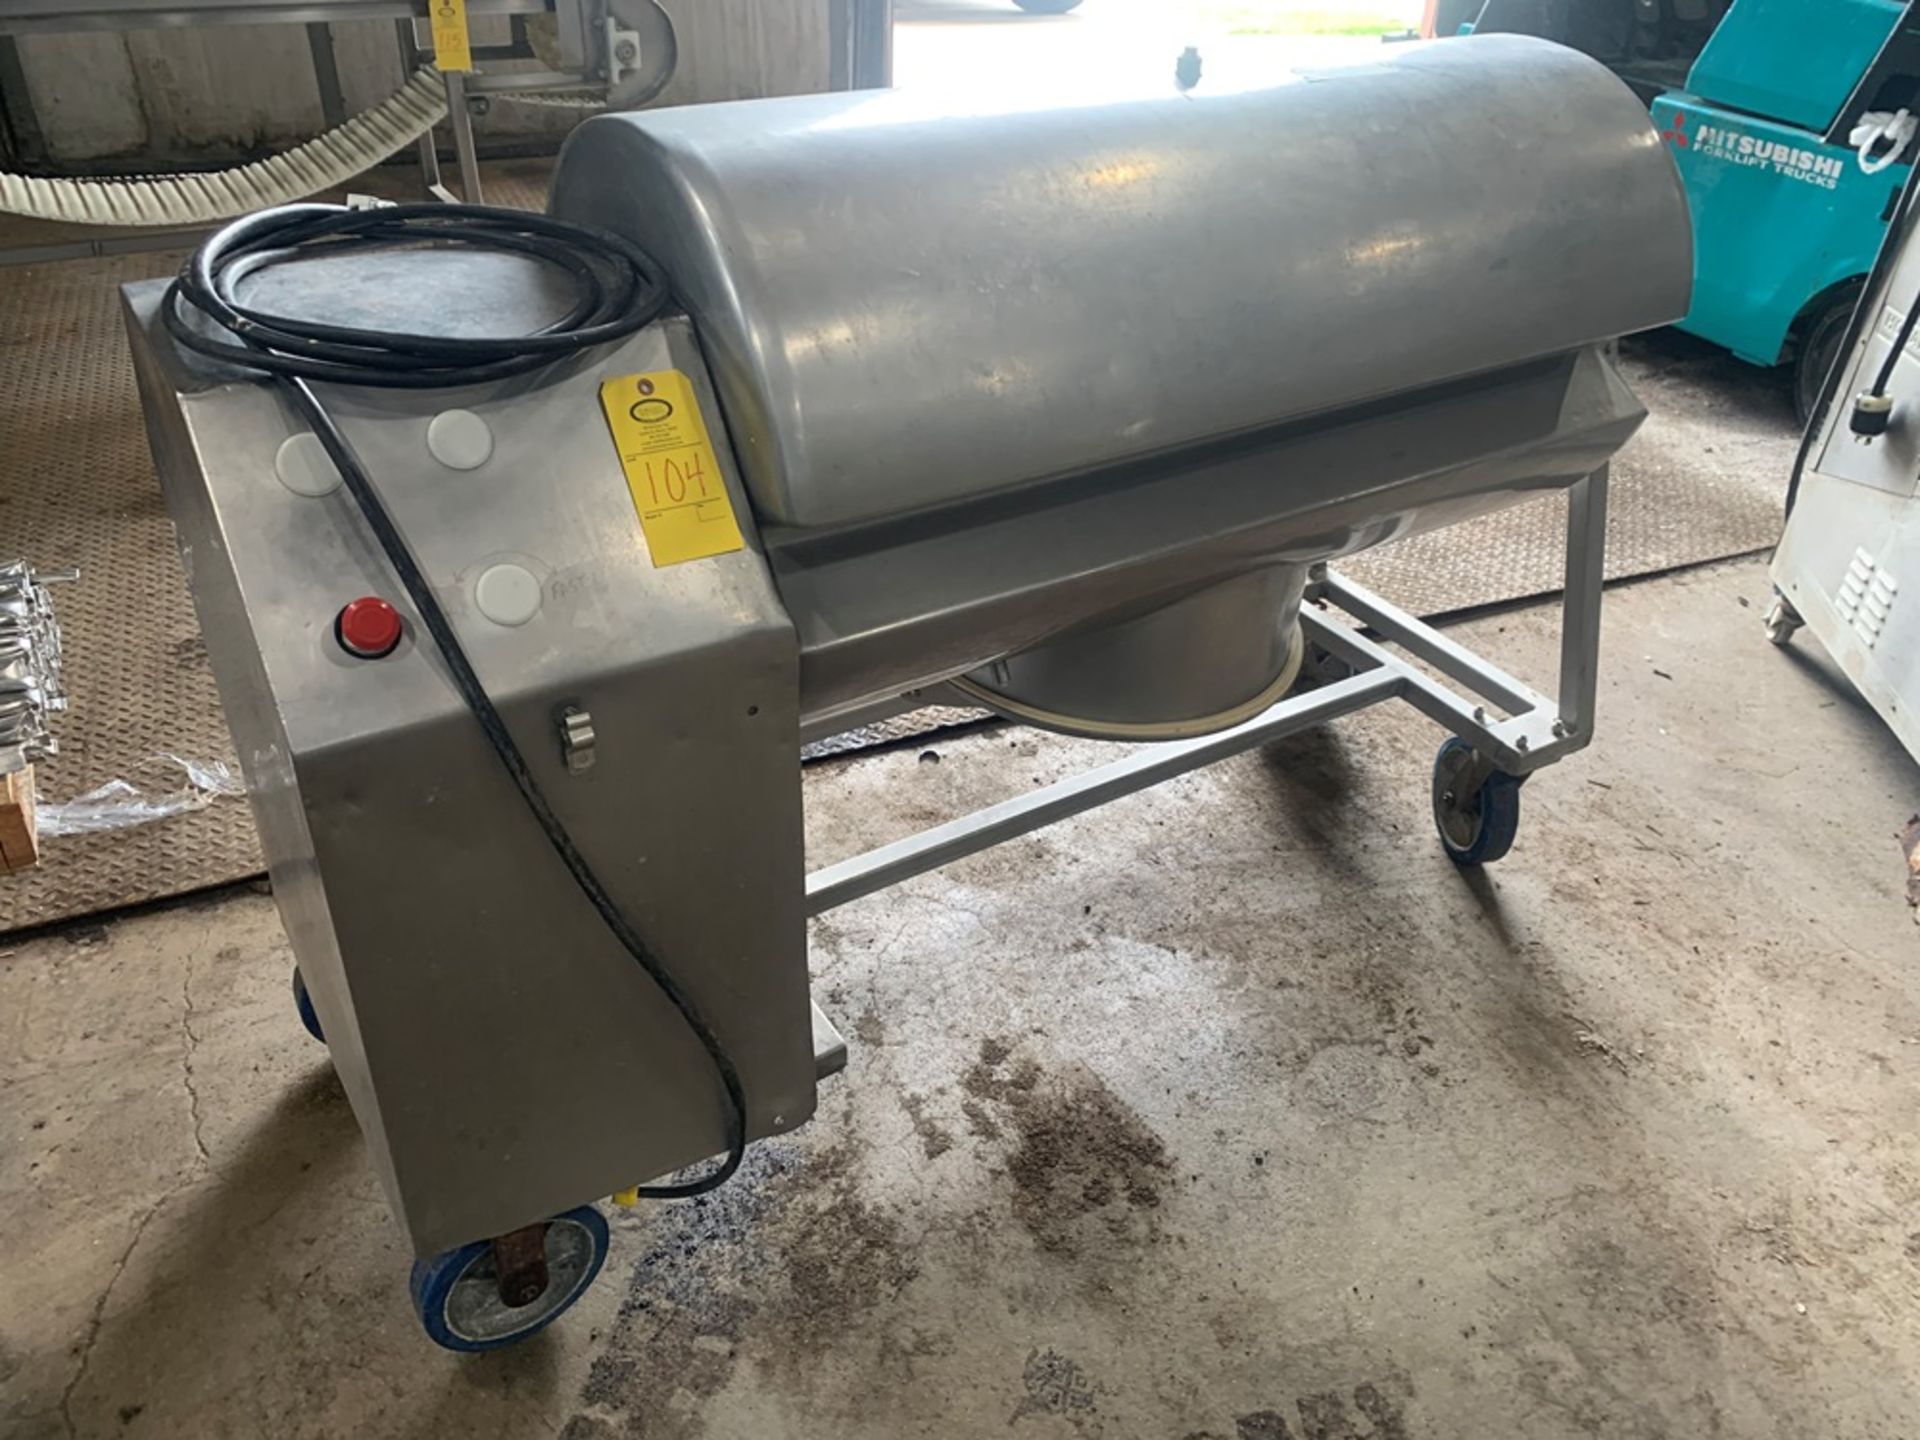 Stainless Steel Vacuum Tumbler, 110 volts, 1 phase, 4' long X 2' diameter drum (Located in Plano,